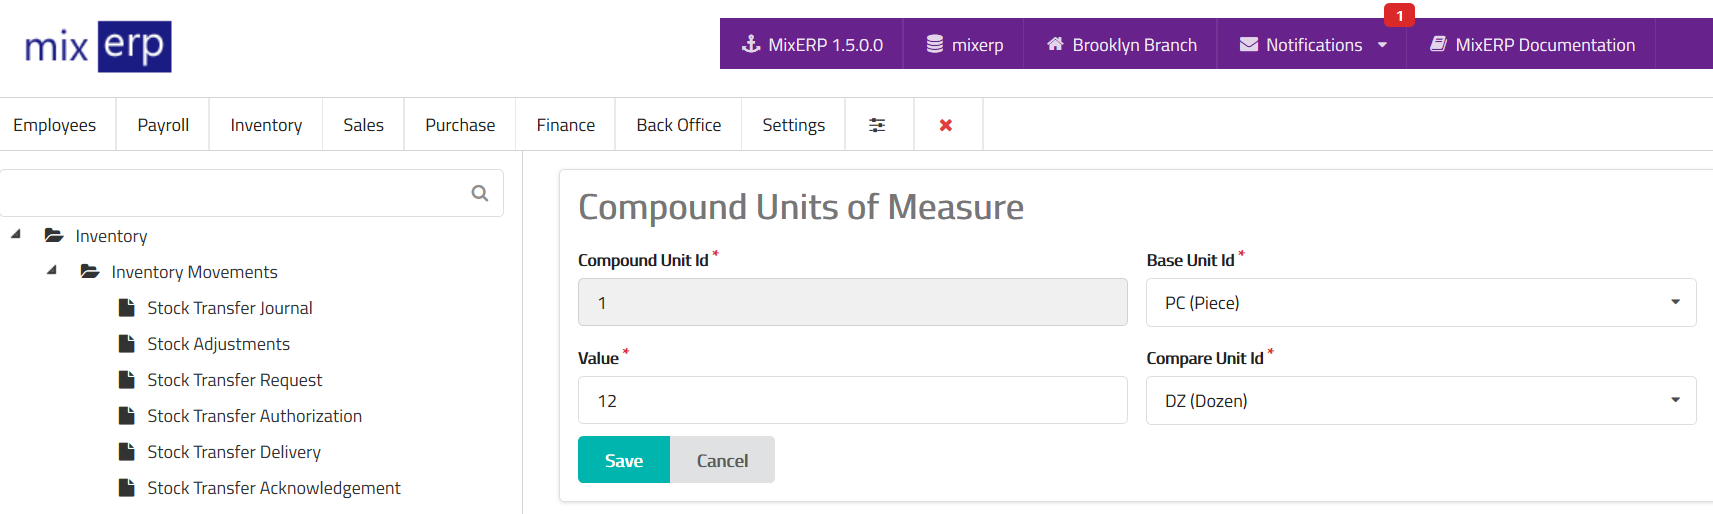 Compound Units of Measures